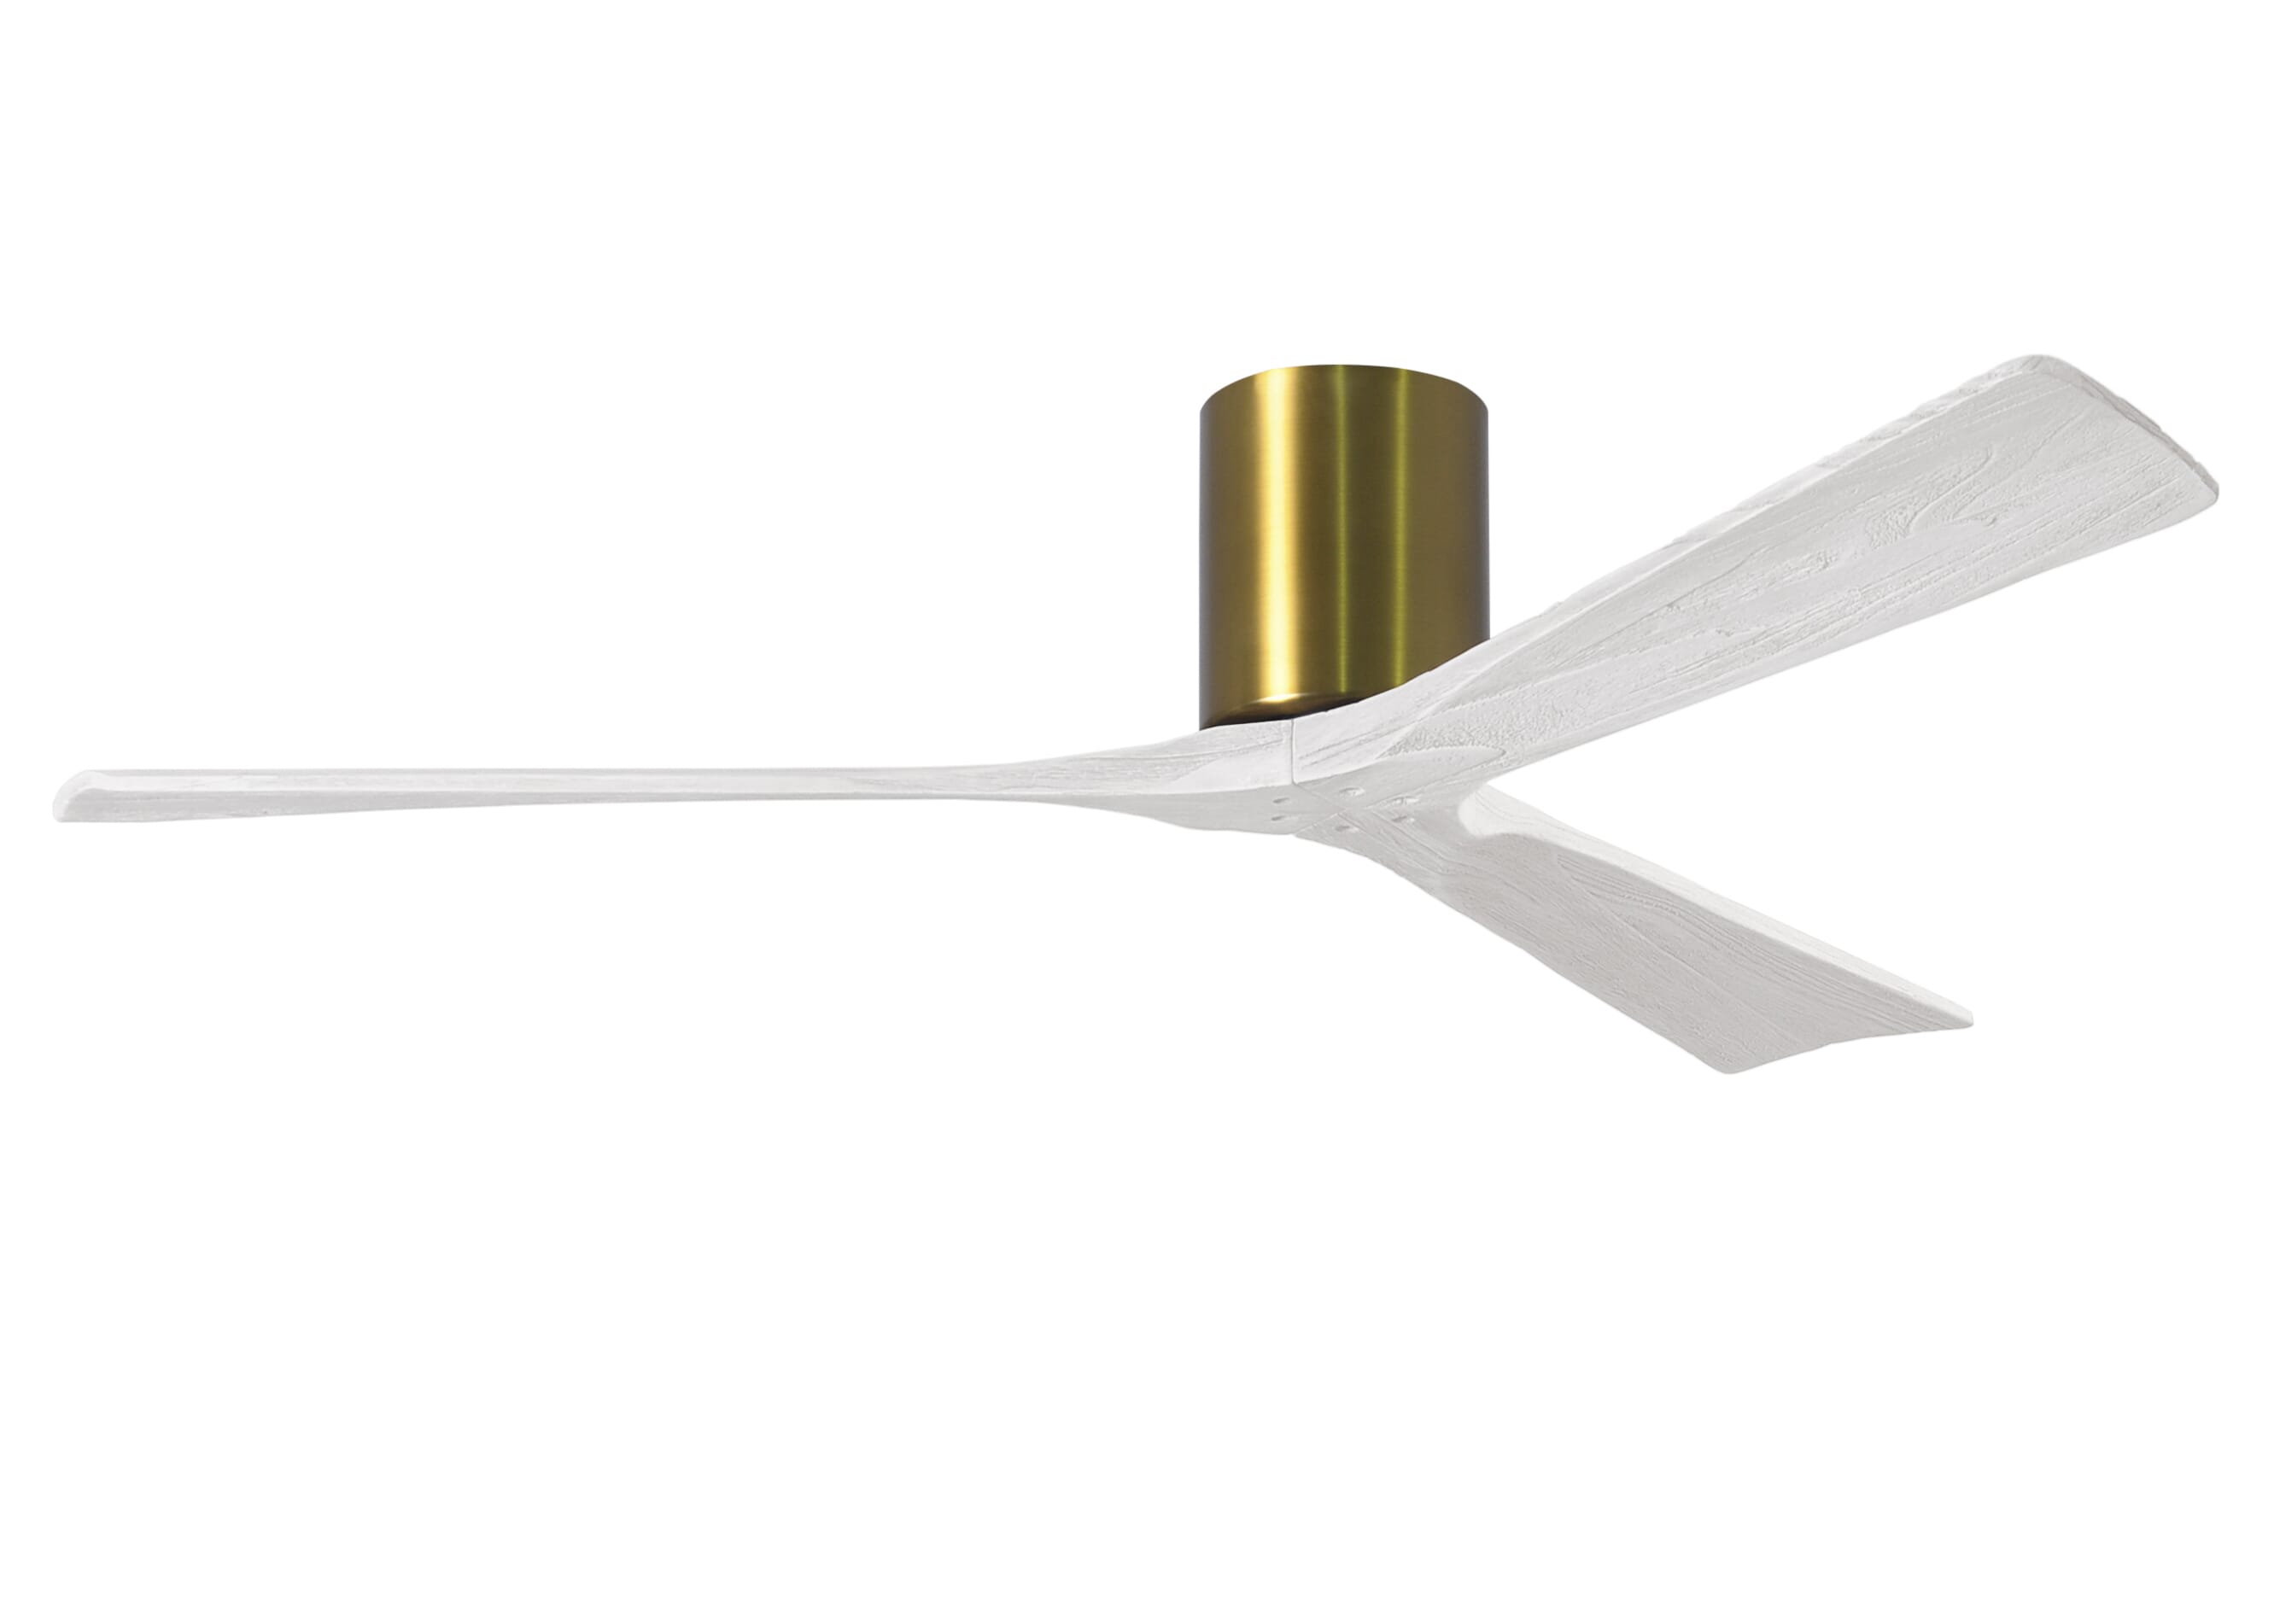 Irene 6-Speed DC 60"" Ceiling Fan in Brushed Brass with Matte White blades -  Matthews Fan Company, IR3H-BRBR-MWH-60